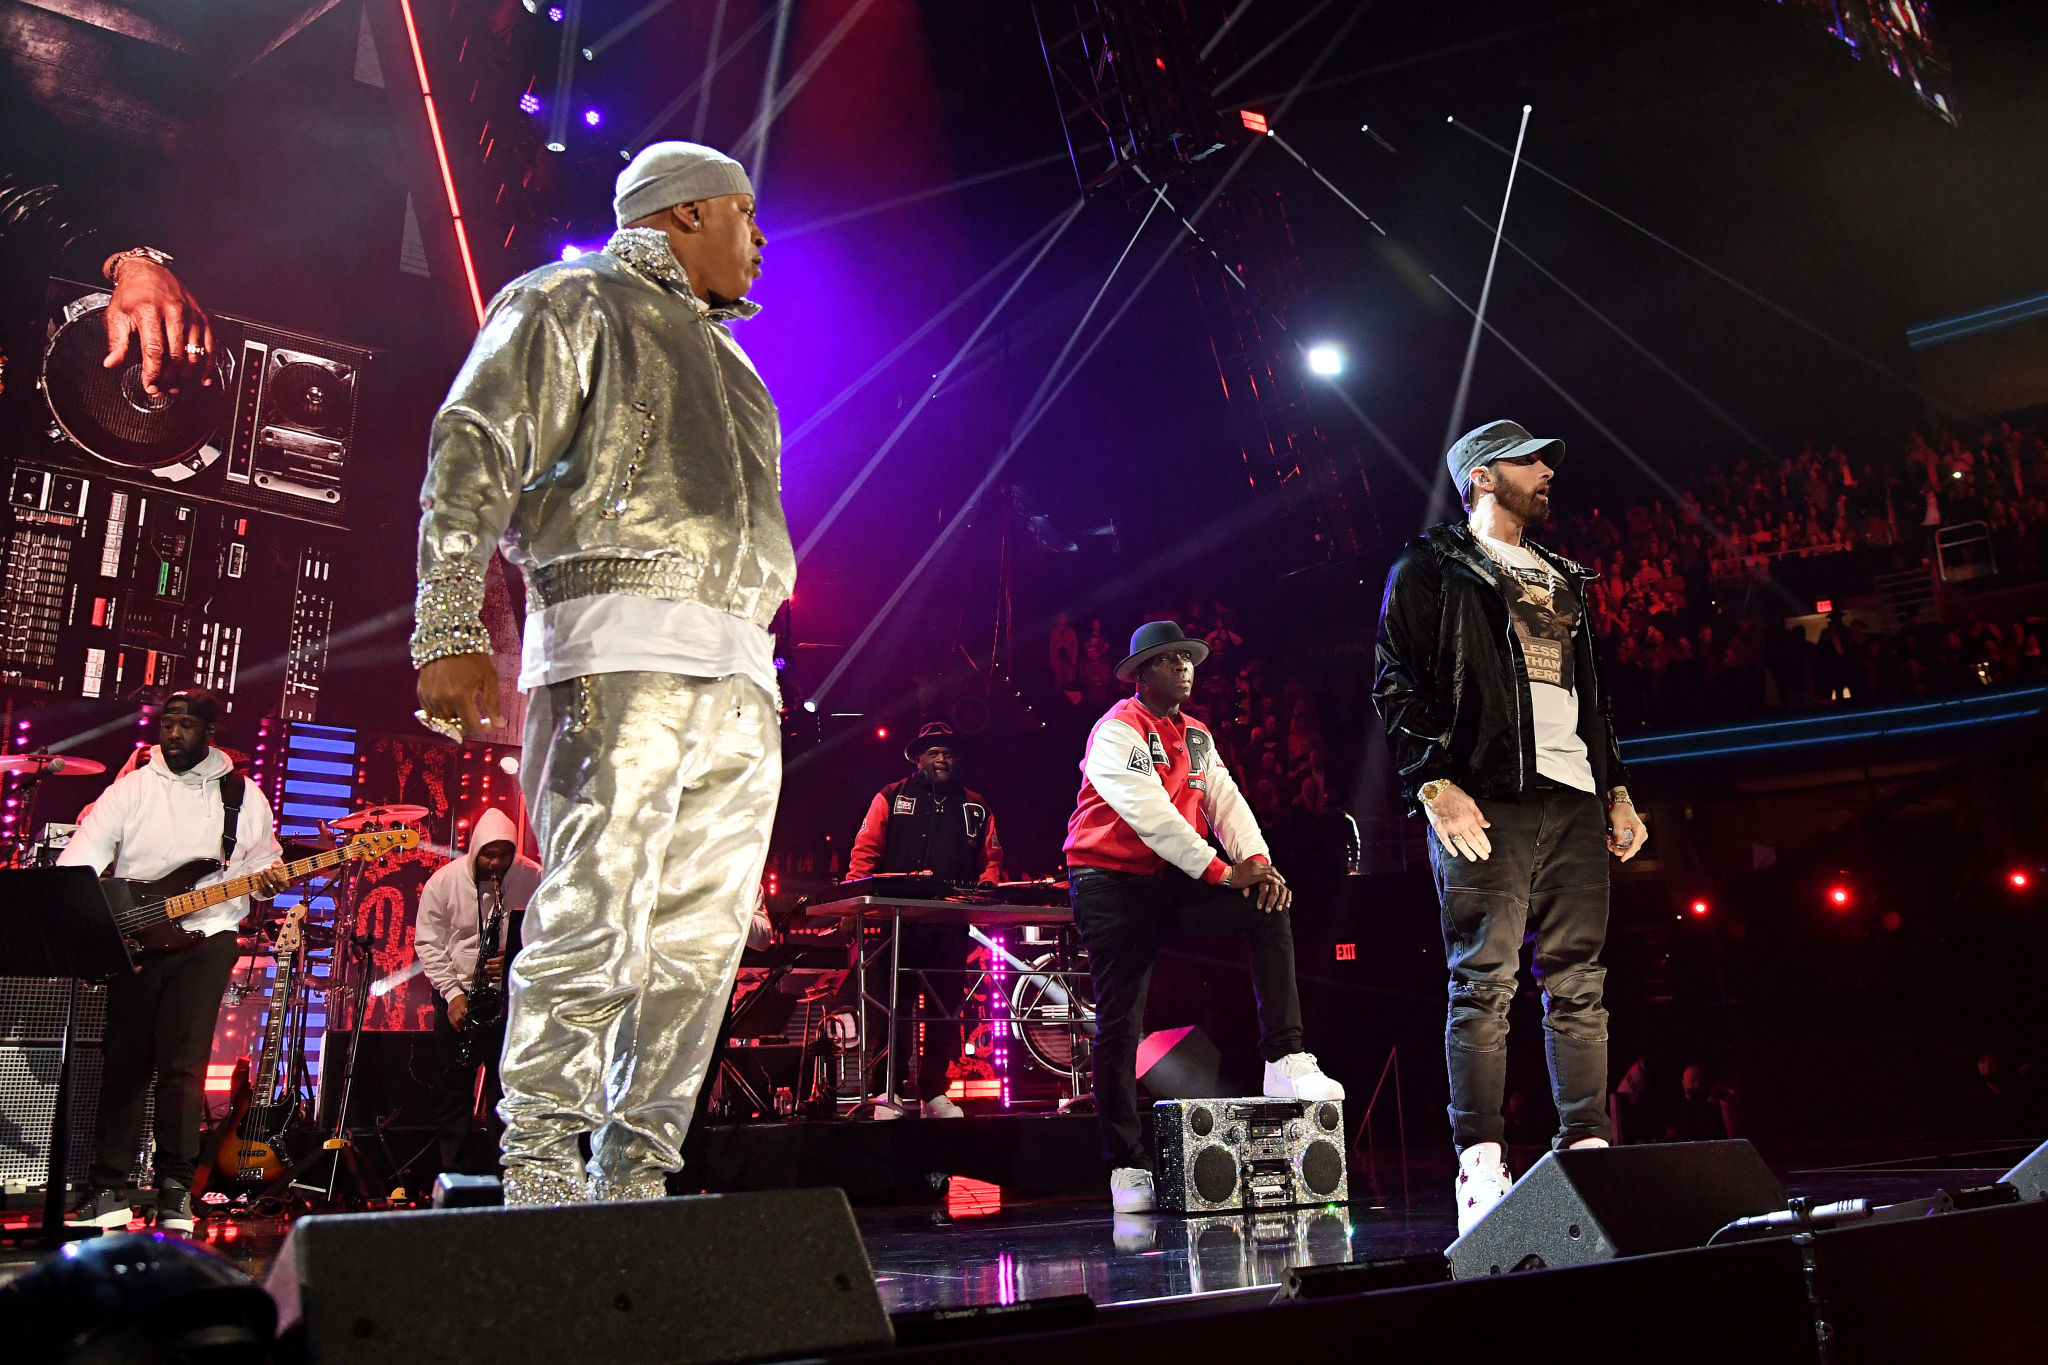 CLEVELAND, OHIO - OCTOBER 30: LL Cool J and Eminem perform onstage during the 36th Annual Rock & Roll Hall Of Fame Induction Ceremony at Rocket Mortgage Fieldhouse on October 30, 2021 in Cleveland, Ohio. (Photo by Kevin Mazur/Getty Images for The Rock and Roll Hall of Fame )